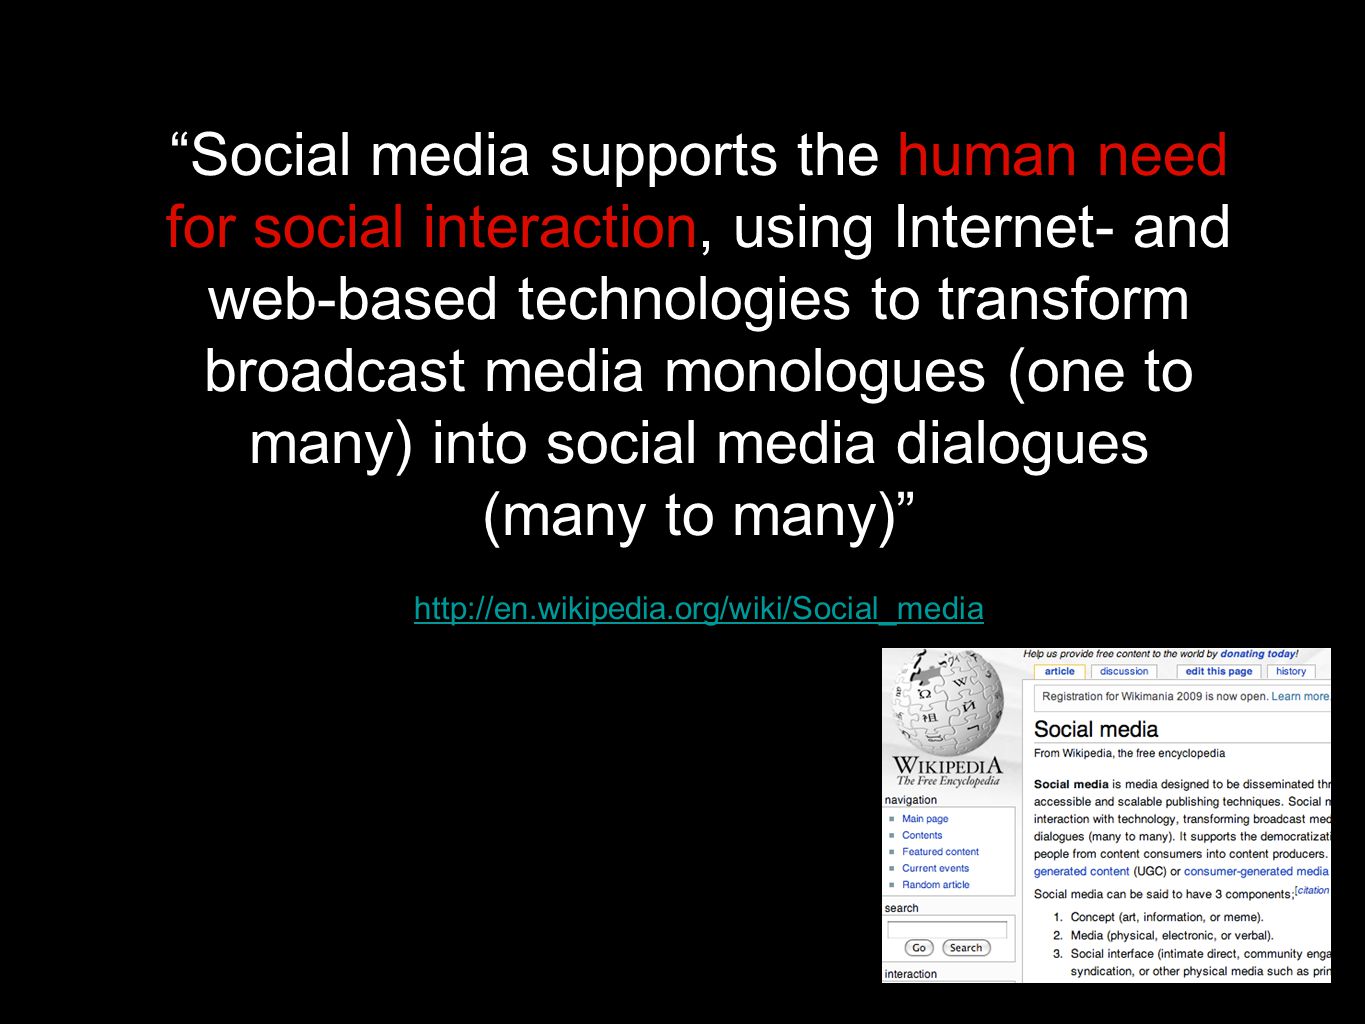 Social media supports the human need for social interaction, using Internet- and web-based technologies to transform broadcast media monologues (one to many) into social media dialogues (many to many)